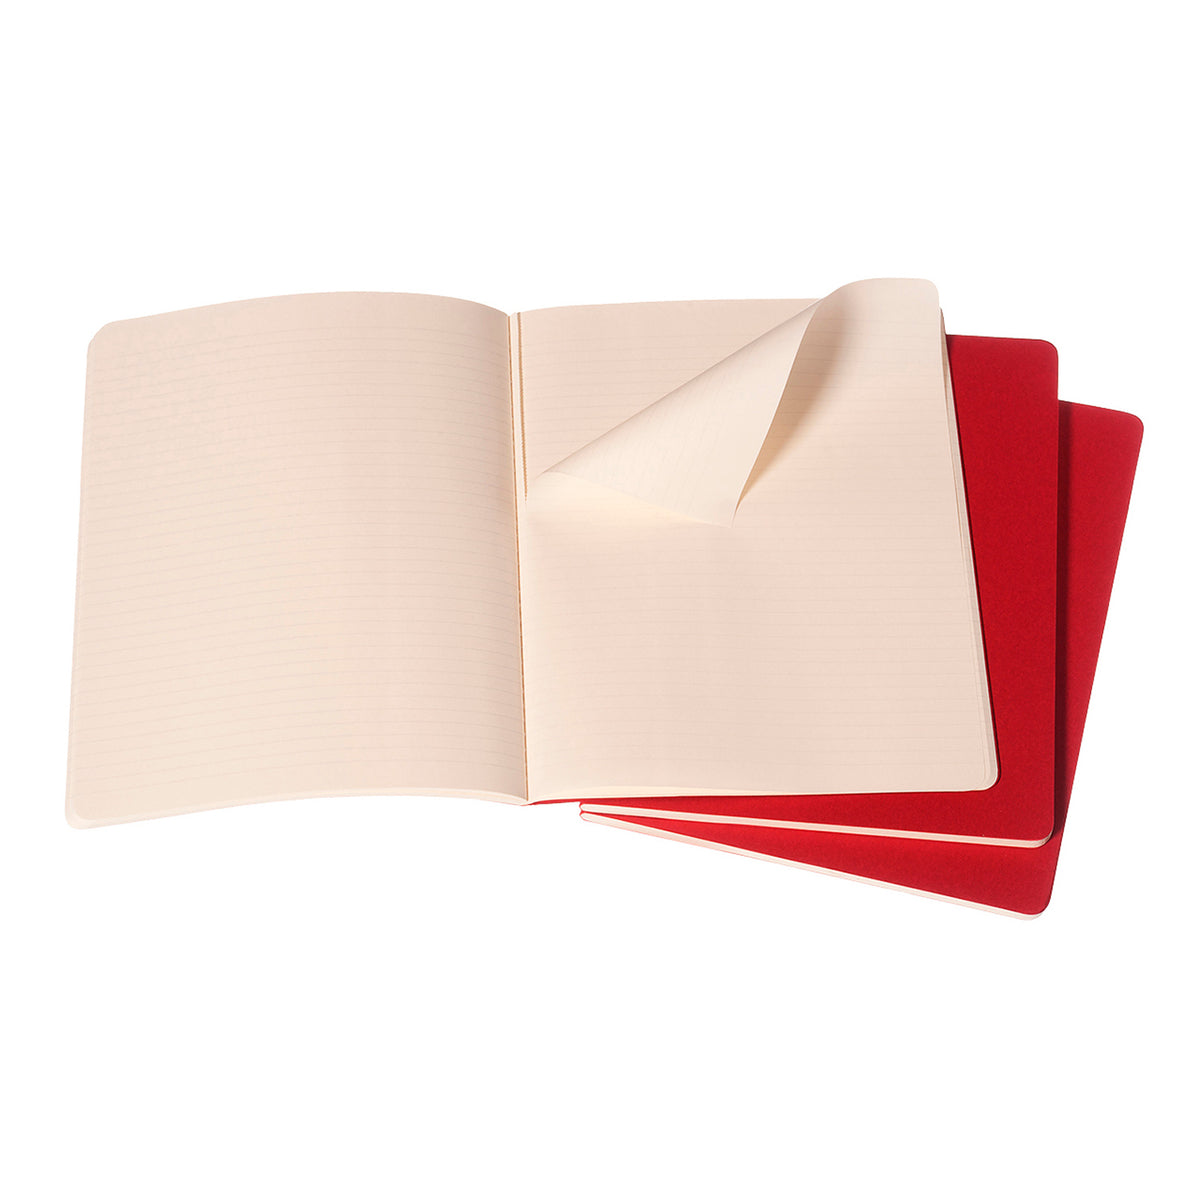 Moleskine - Cahier Notebook - Set of 3 - Ruled - Extra Large - Cranberry Red